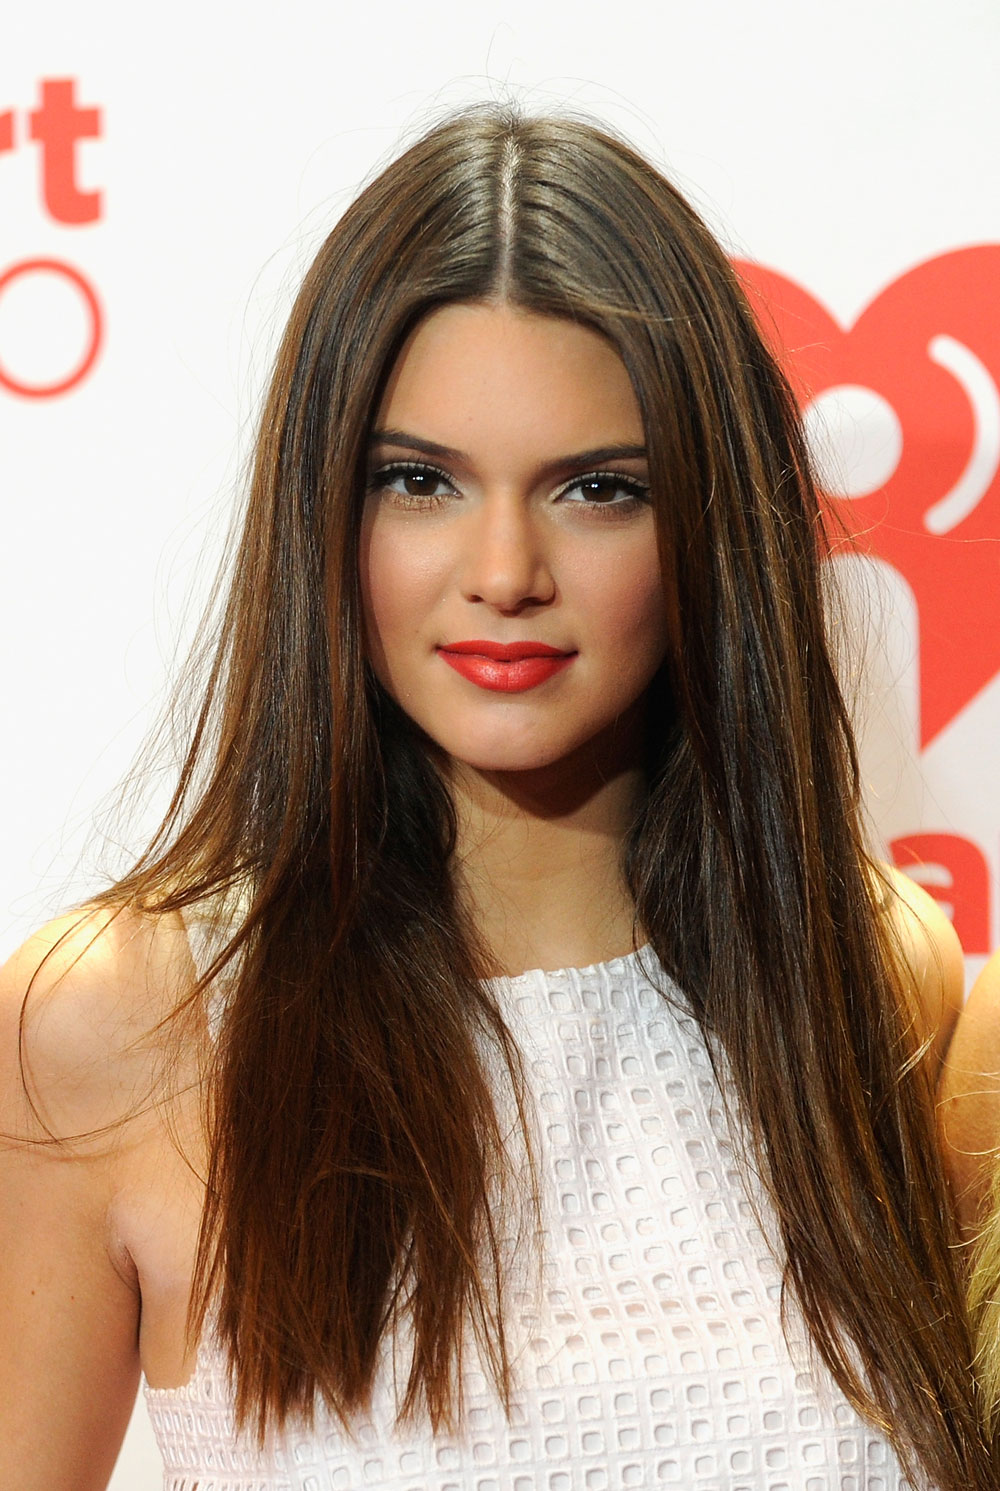 Kendall Jenner in 2013, when she had highlights in her hair and full lips